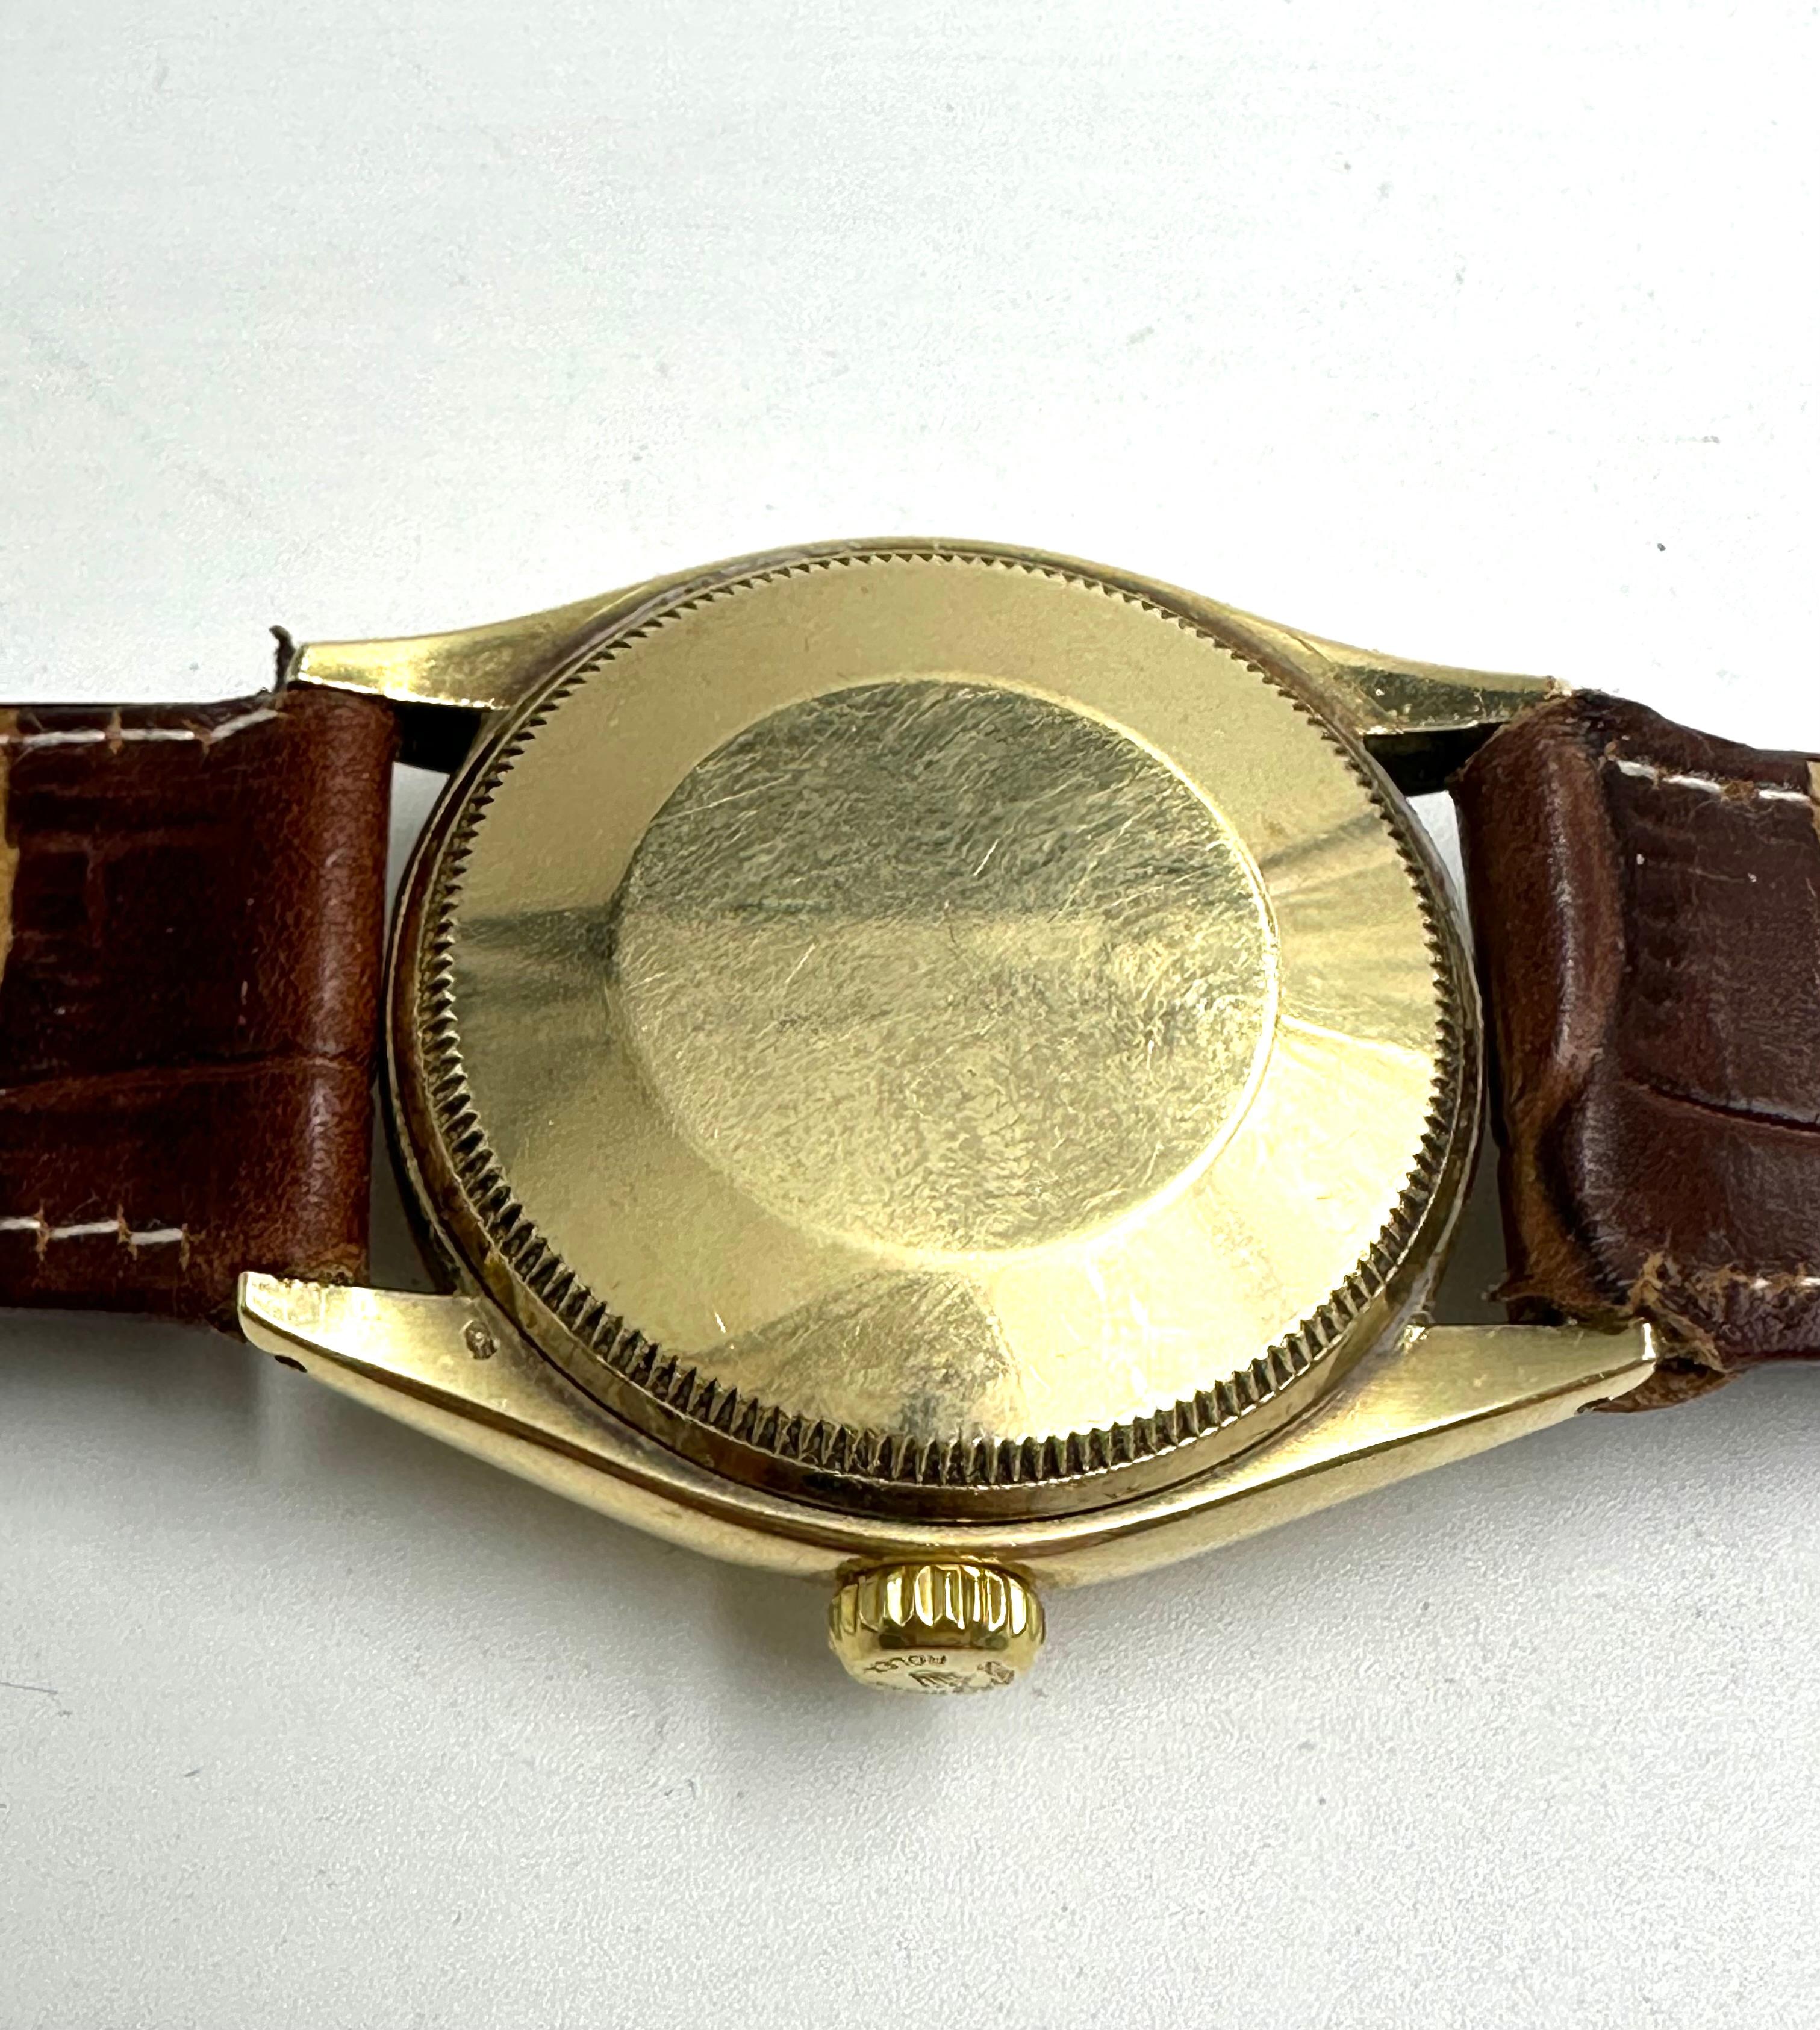 Rolex Oyster Perpetual, Ref 6084, 14K gold case In Excellent Condition For Sale In Sežana, SI